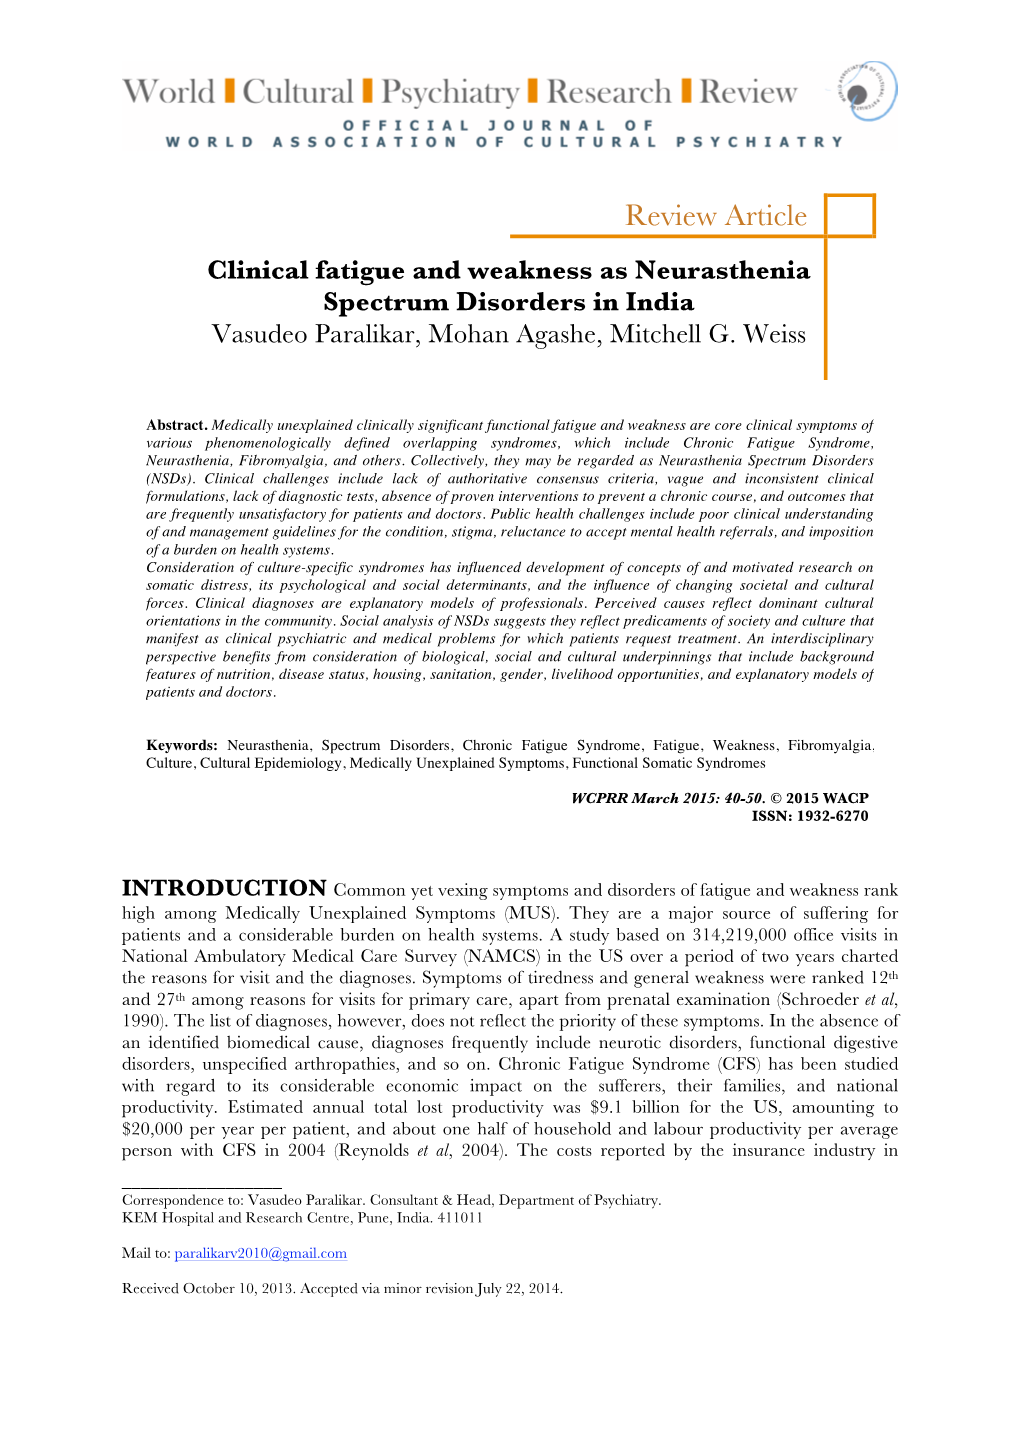 Clinical Fatigue and Weakness As Neurasthenia Spectrum Disorders in India Vasudeo Paralikar, Mohan Agashe, Mitchell G